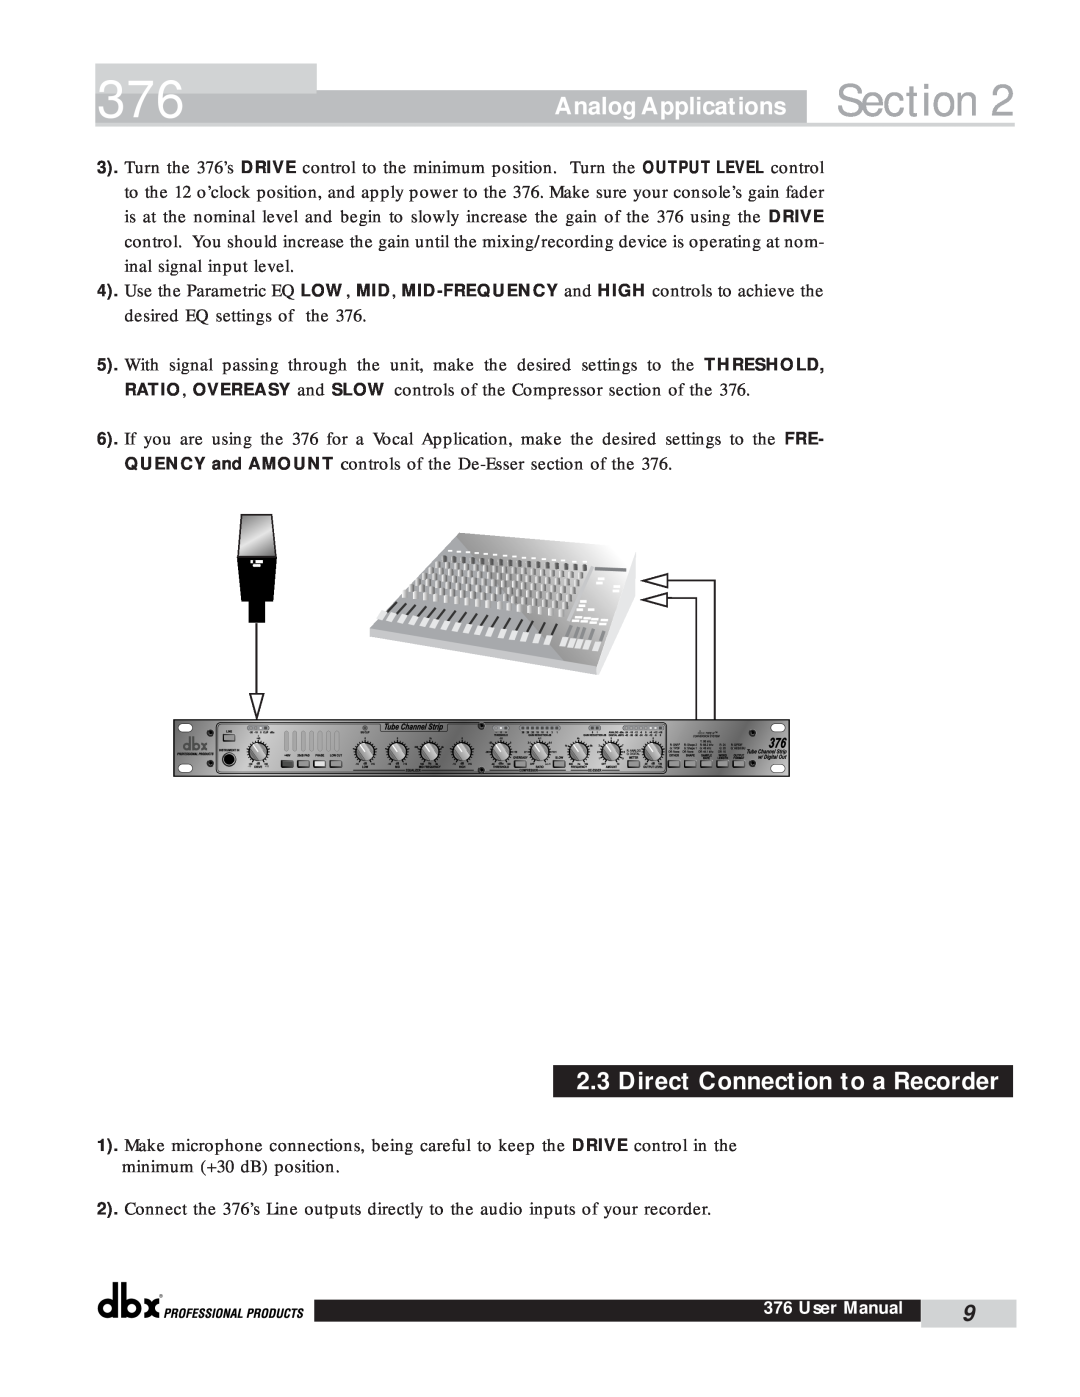 dbx Pro 376 user manual Direct Connection to a Recorder, Section, Analog Applications 